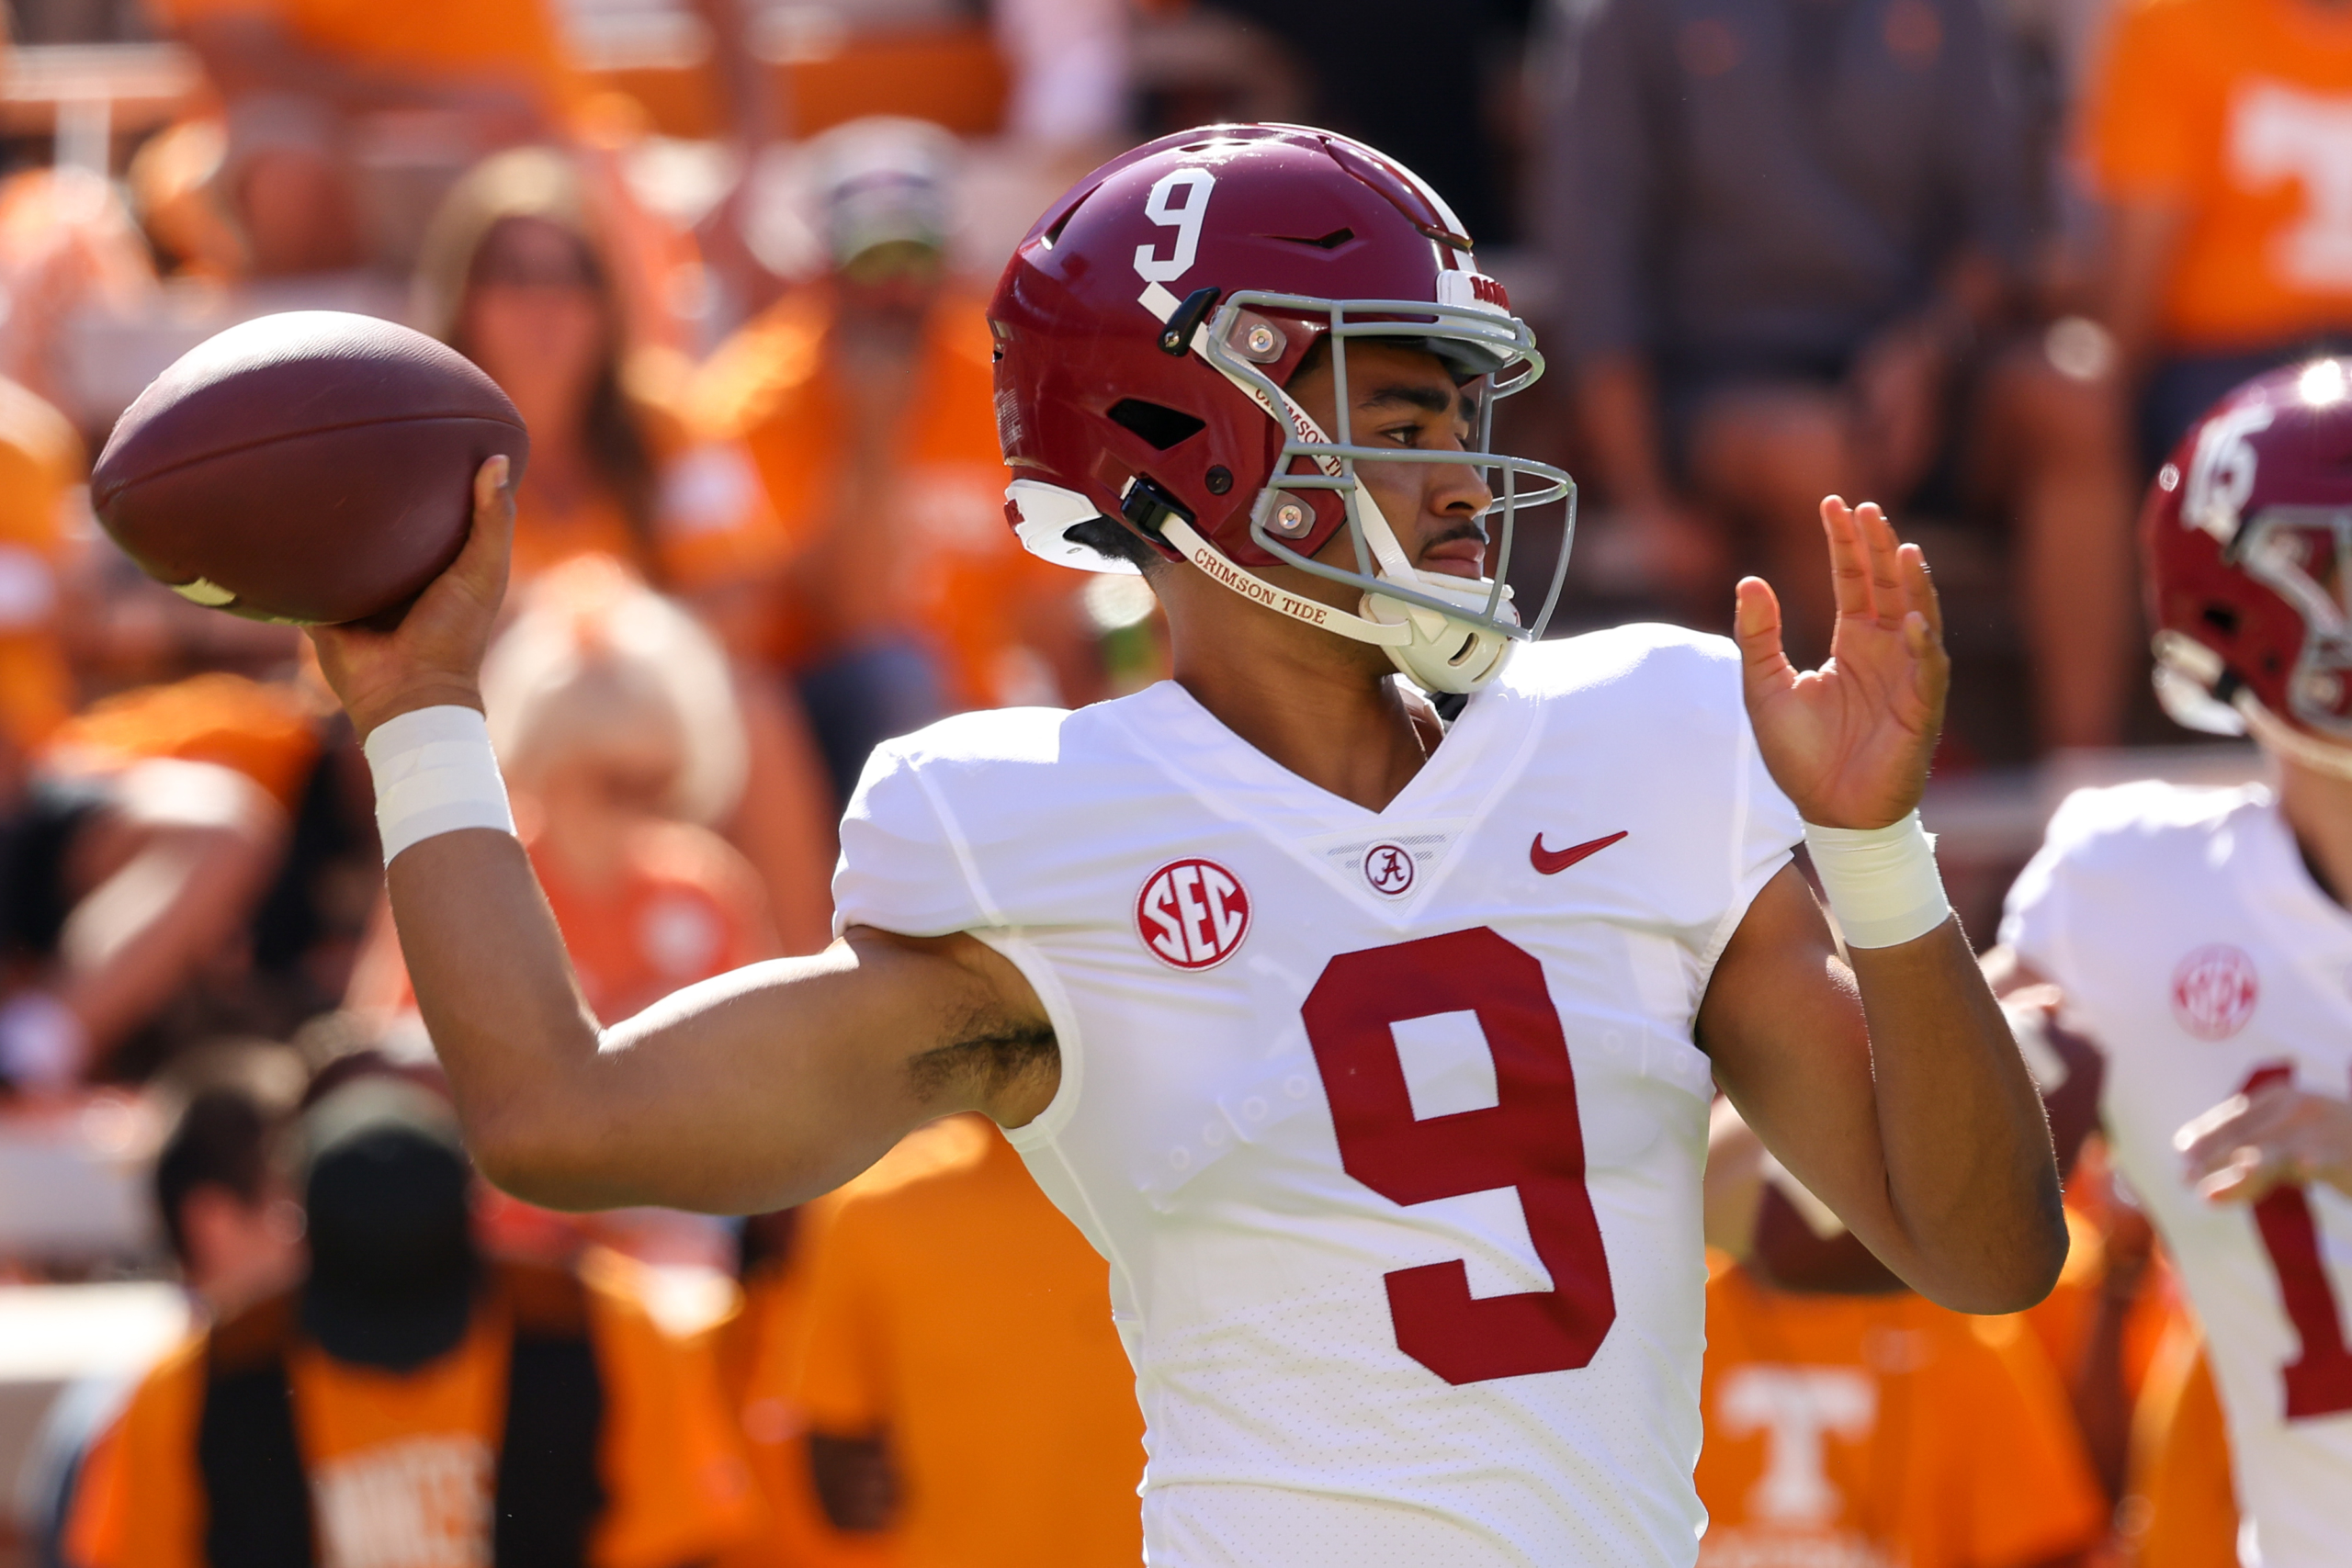 2023 NFL mock draft: 3 QBs in top 10, latest NFL Draft projection